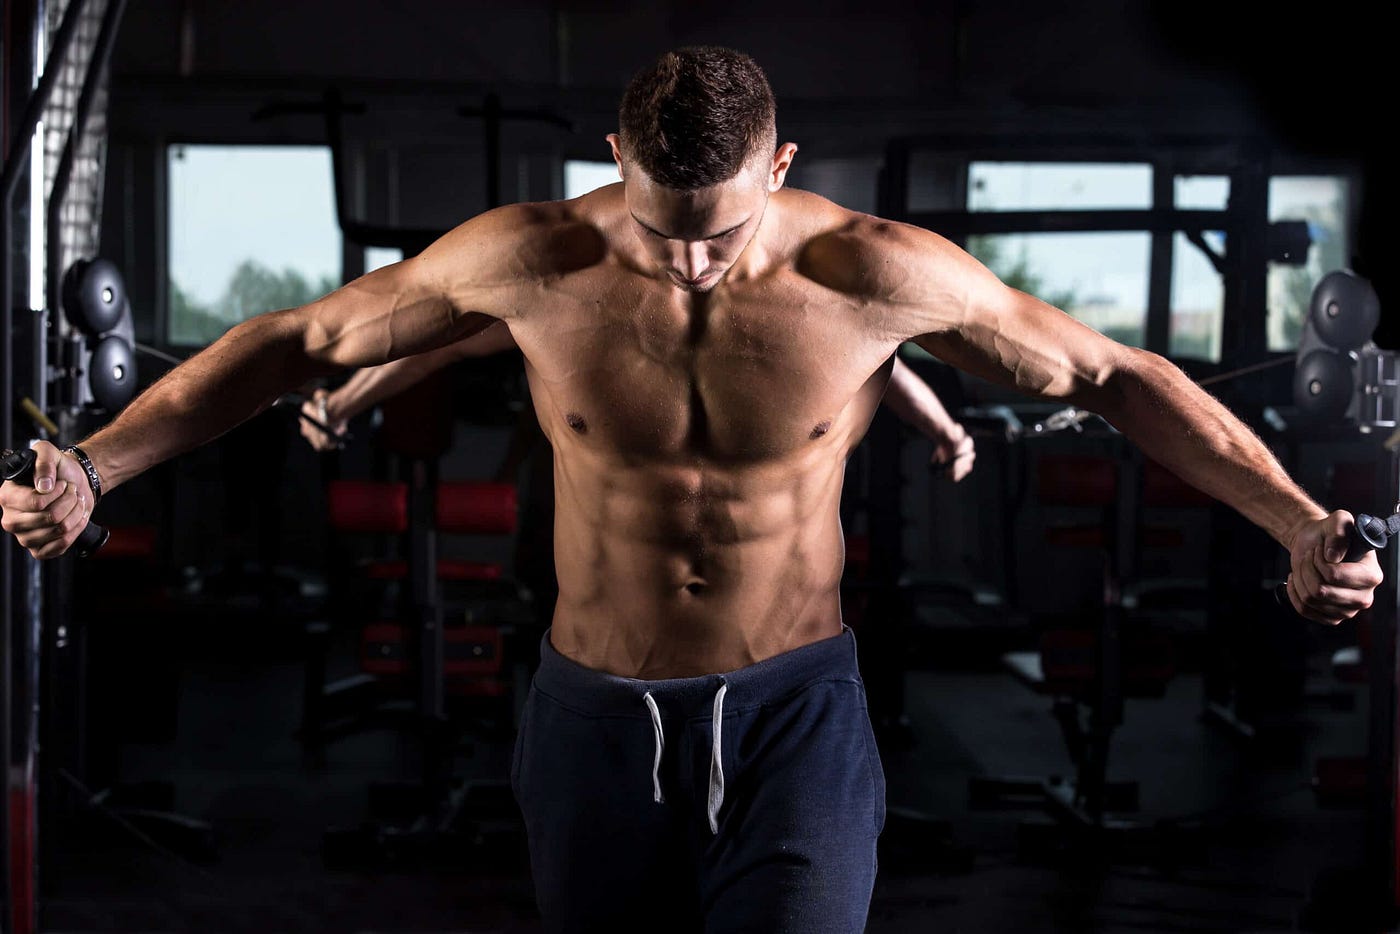 How to Gain a Bigger and Stronger Chest in Just 30 Days